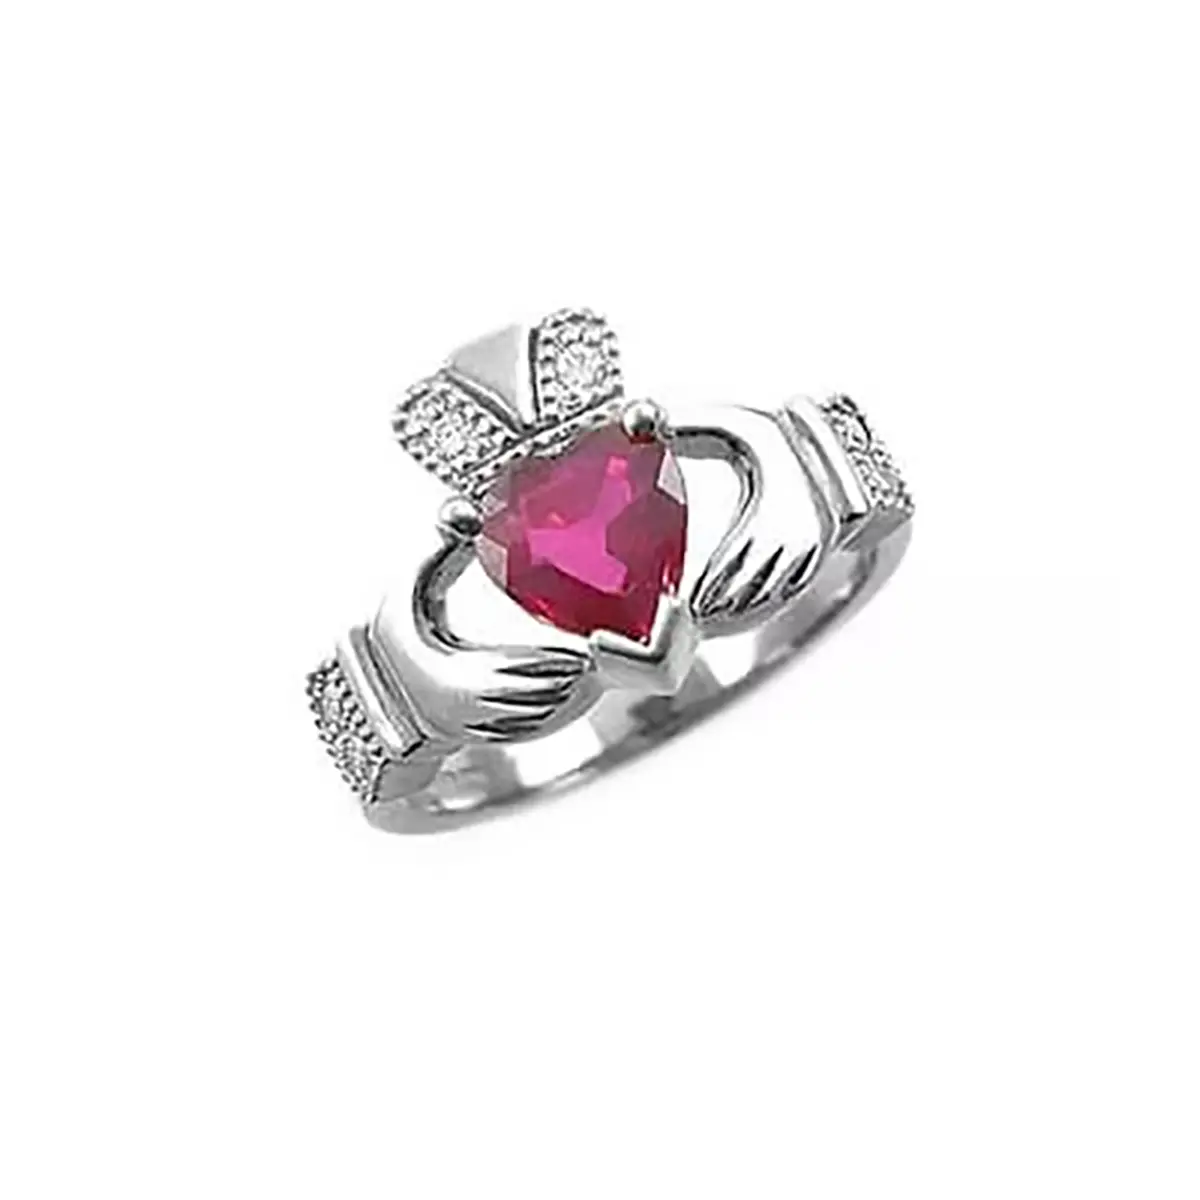 Claddagh Engagement Ring With Ruby In White Gold...